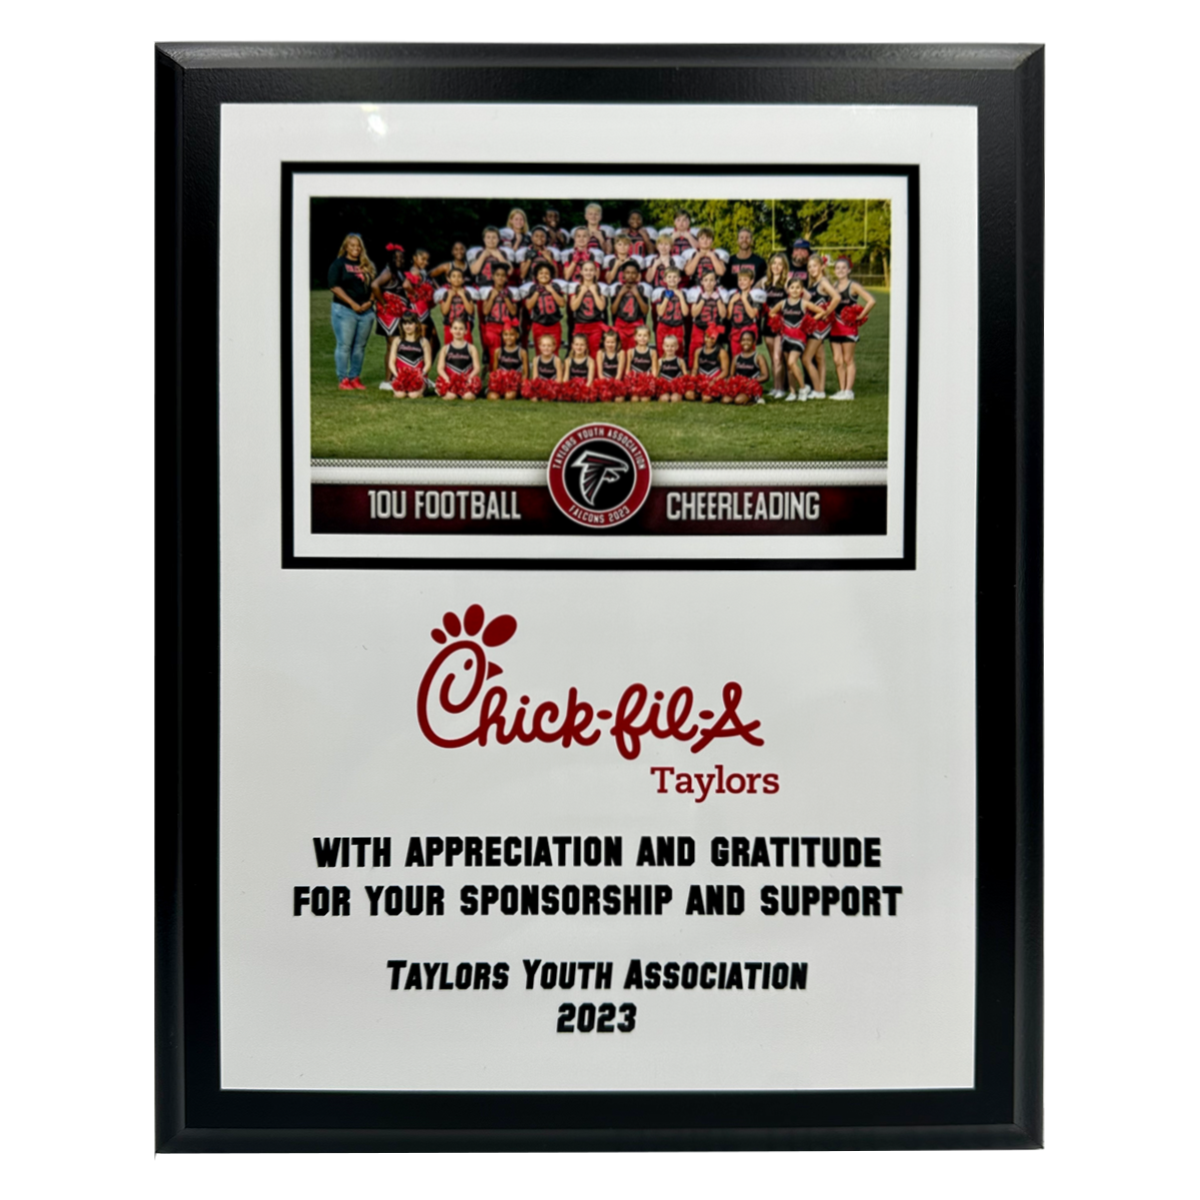 100 Series Plaque in Black, Cherry or Walnut Finish Board with Full Color Sublimated Plate